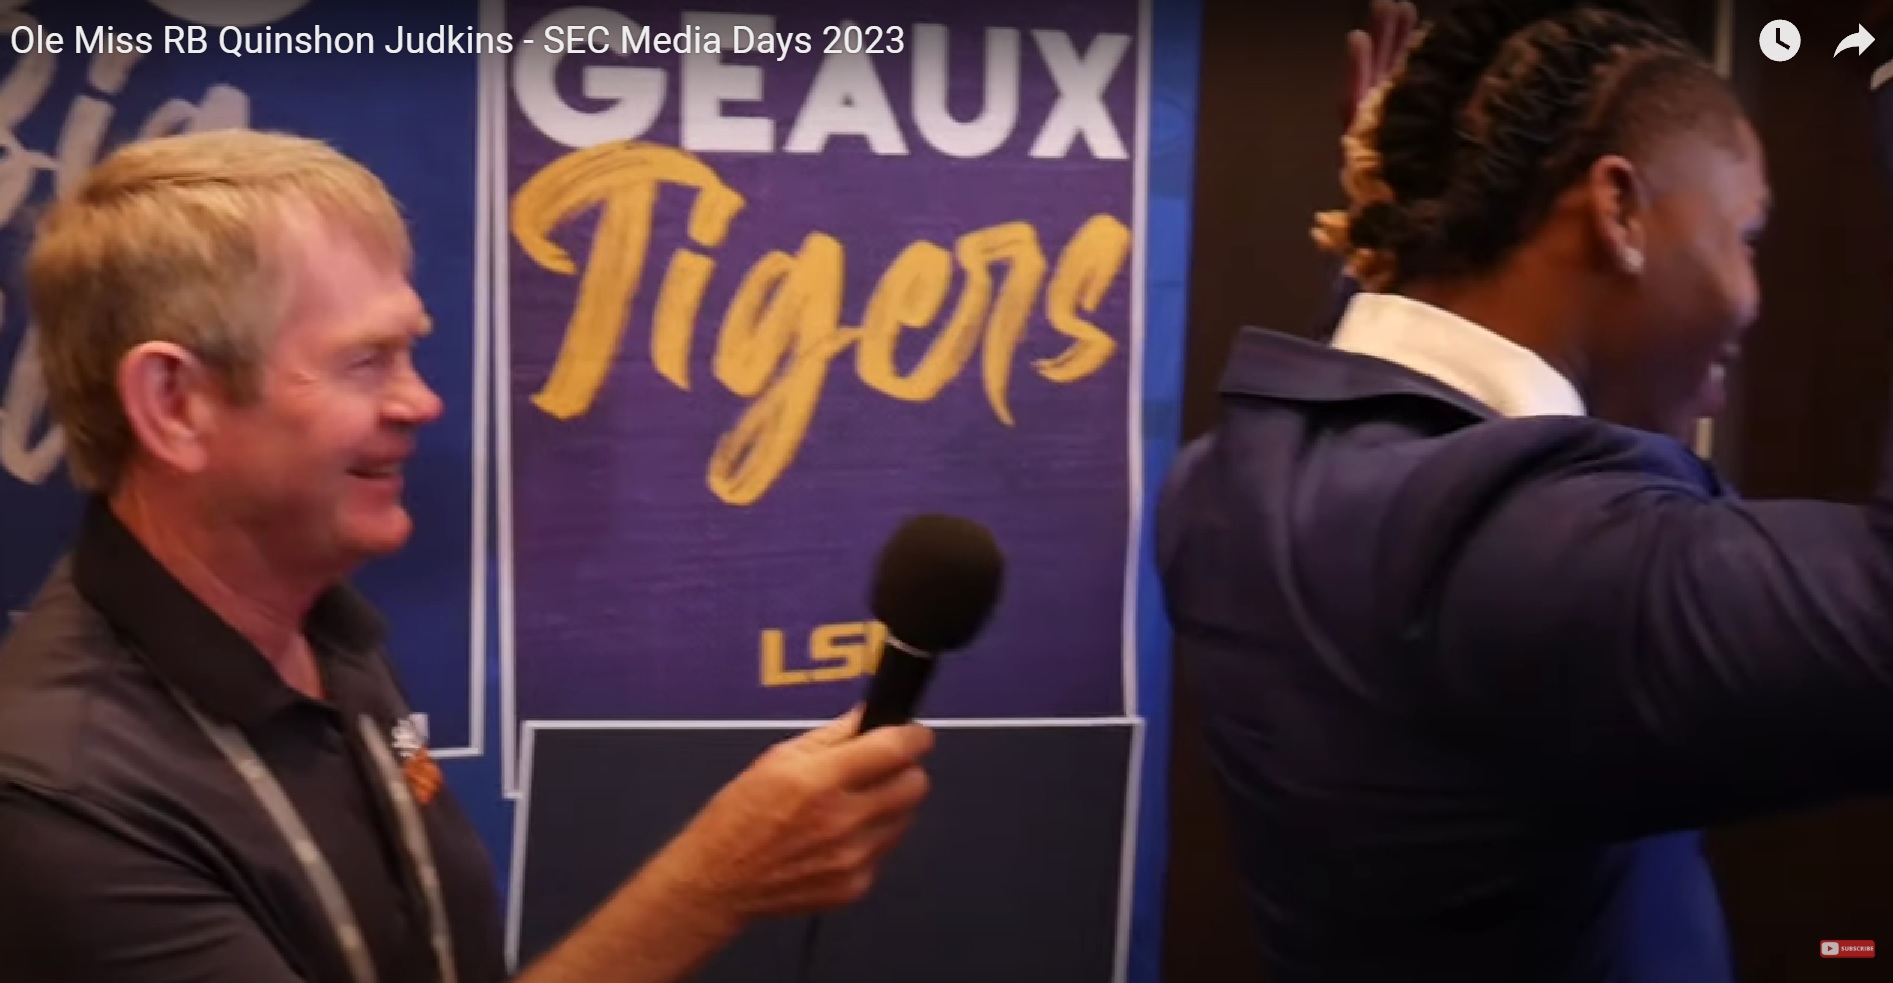 WATCH: Jimmy Hyams talks to Ole Miss RB Quinshon Judkins at #SECMD23